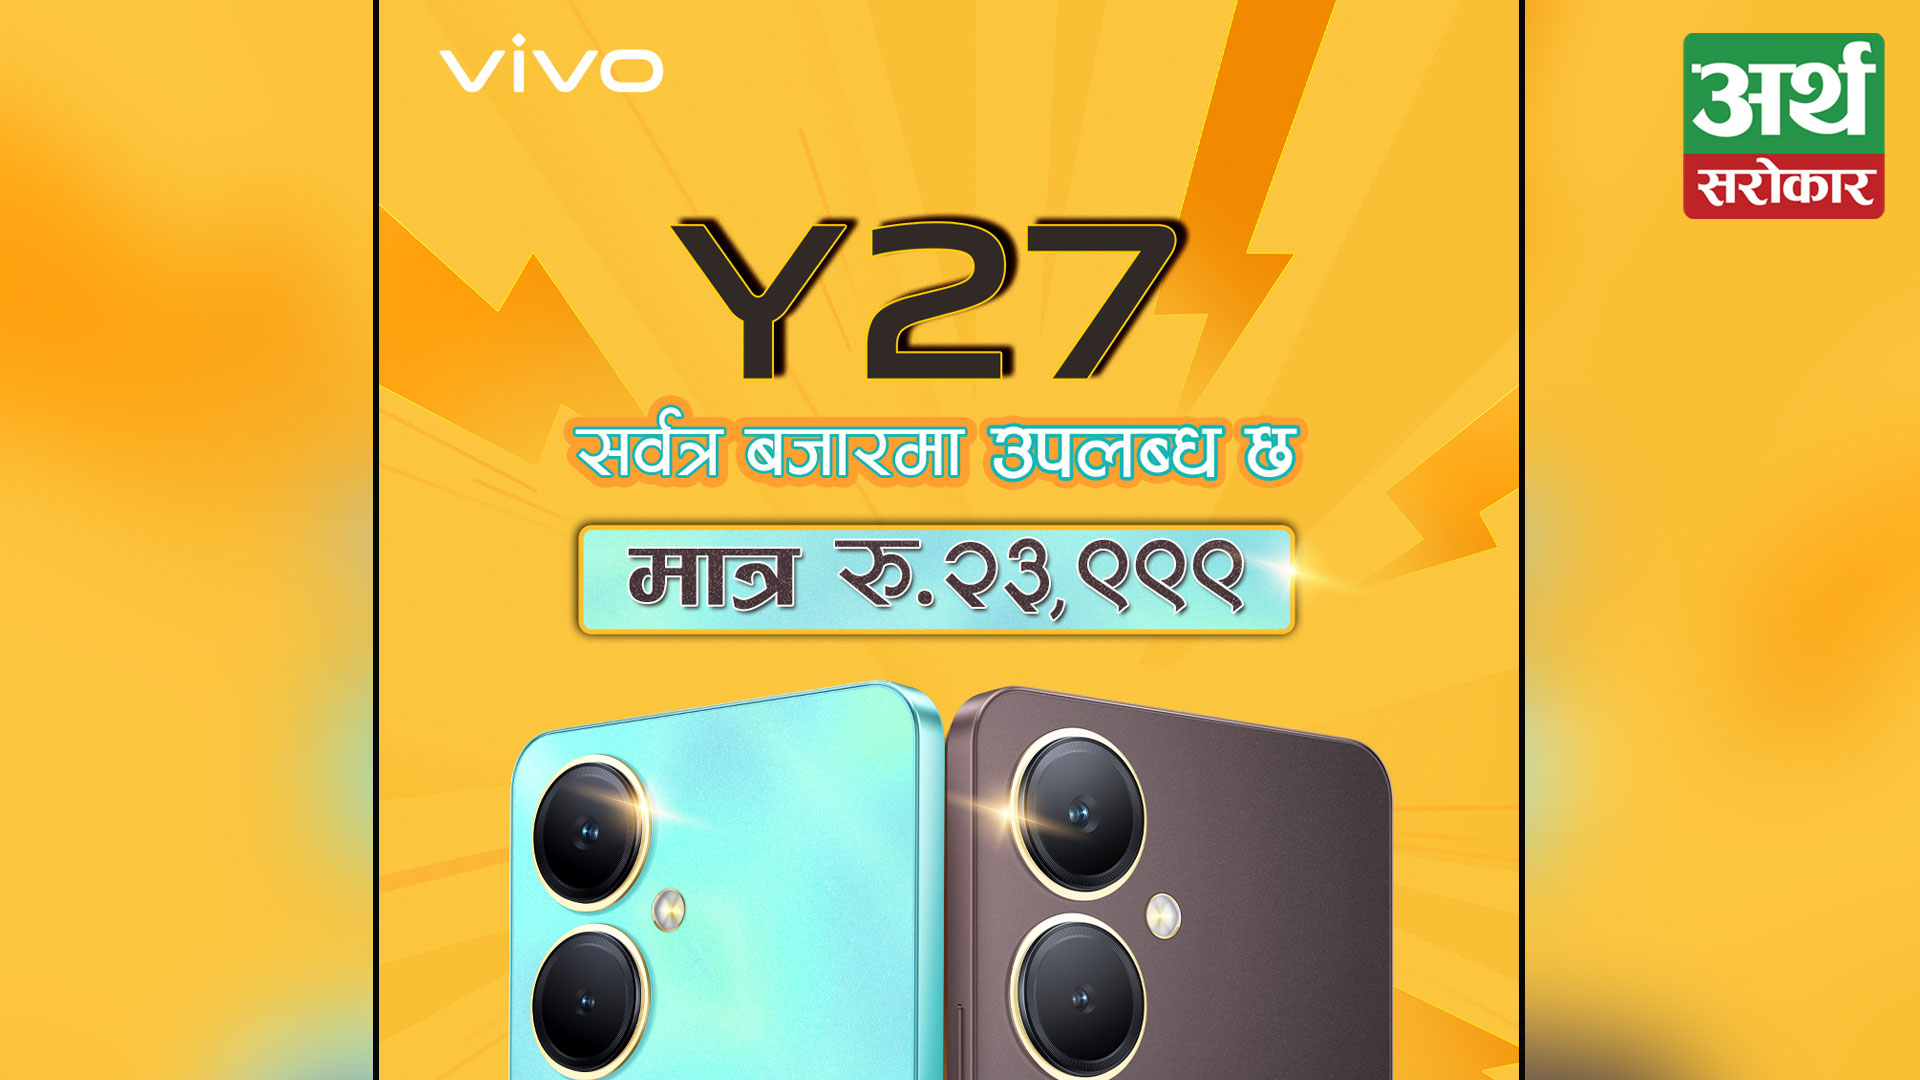 Experience an Unmatching Speed and Power with vivo Y27’s 44W FlashCharge Technology